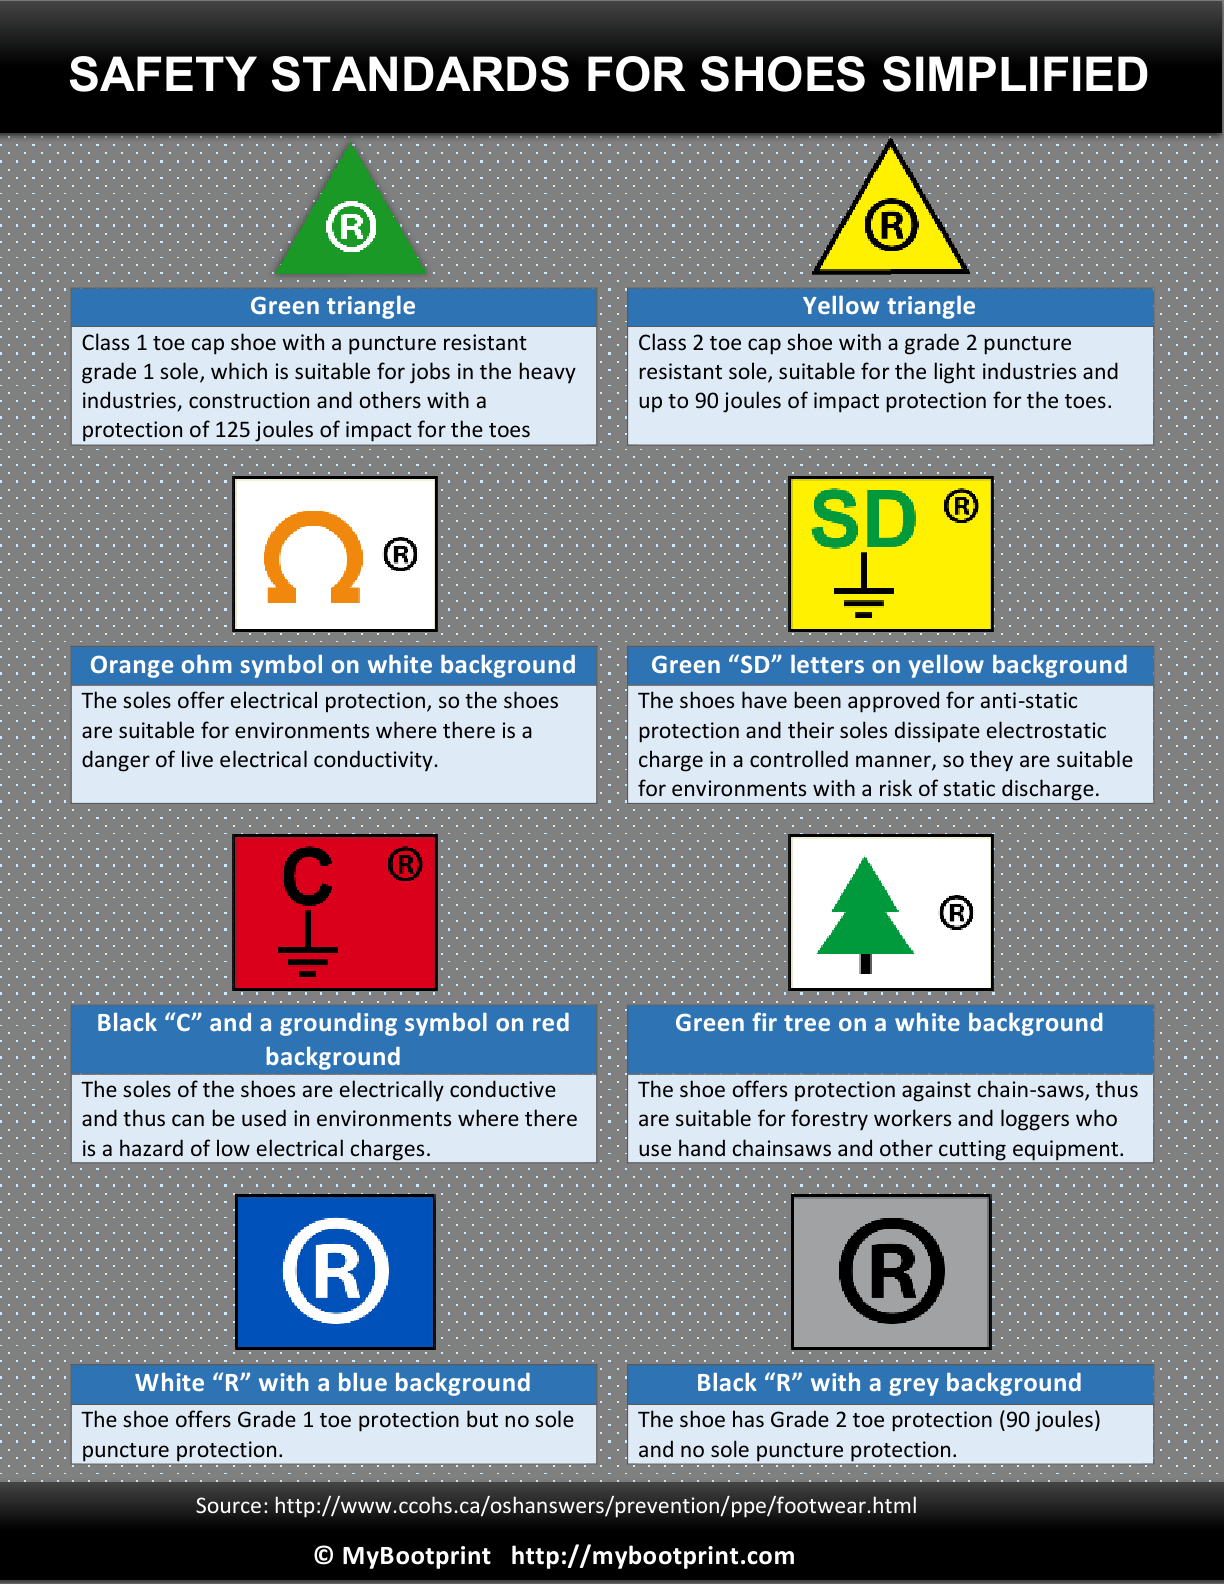 Red and Green Triangle Logo - Simple guide to safety symbols on work boots